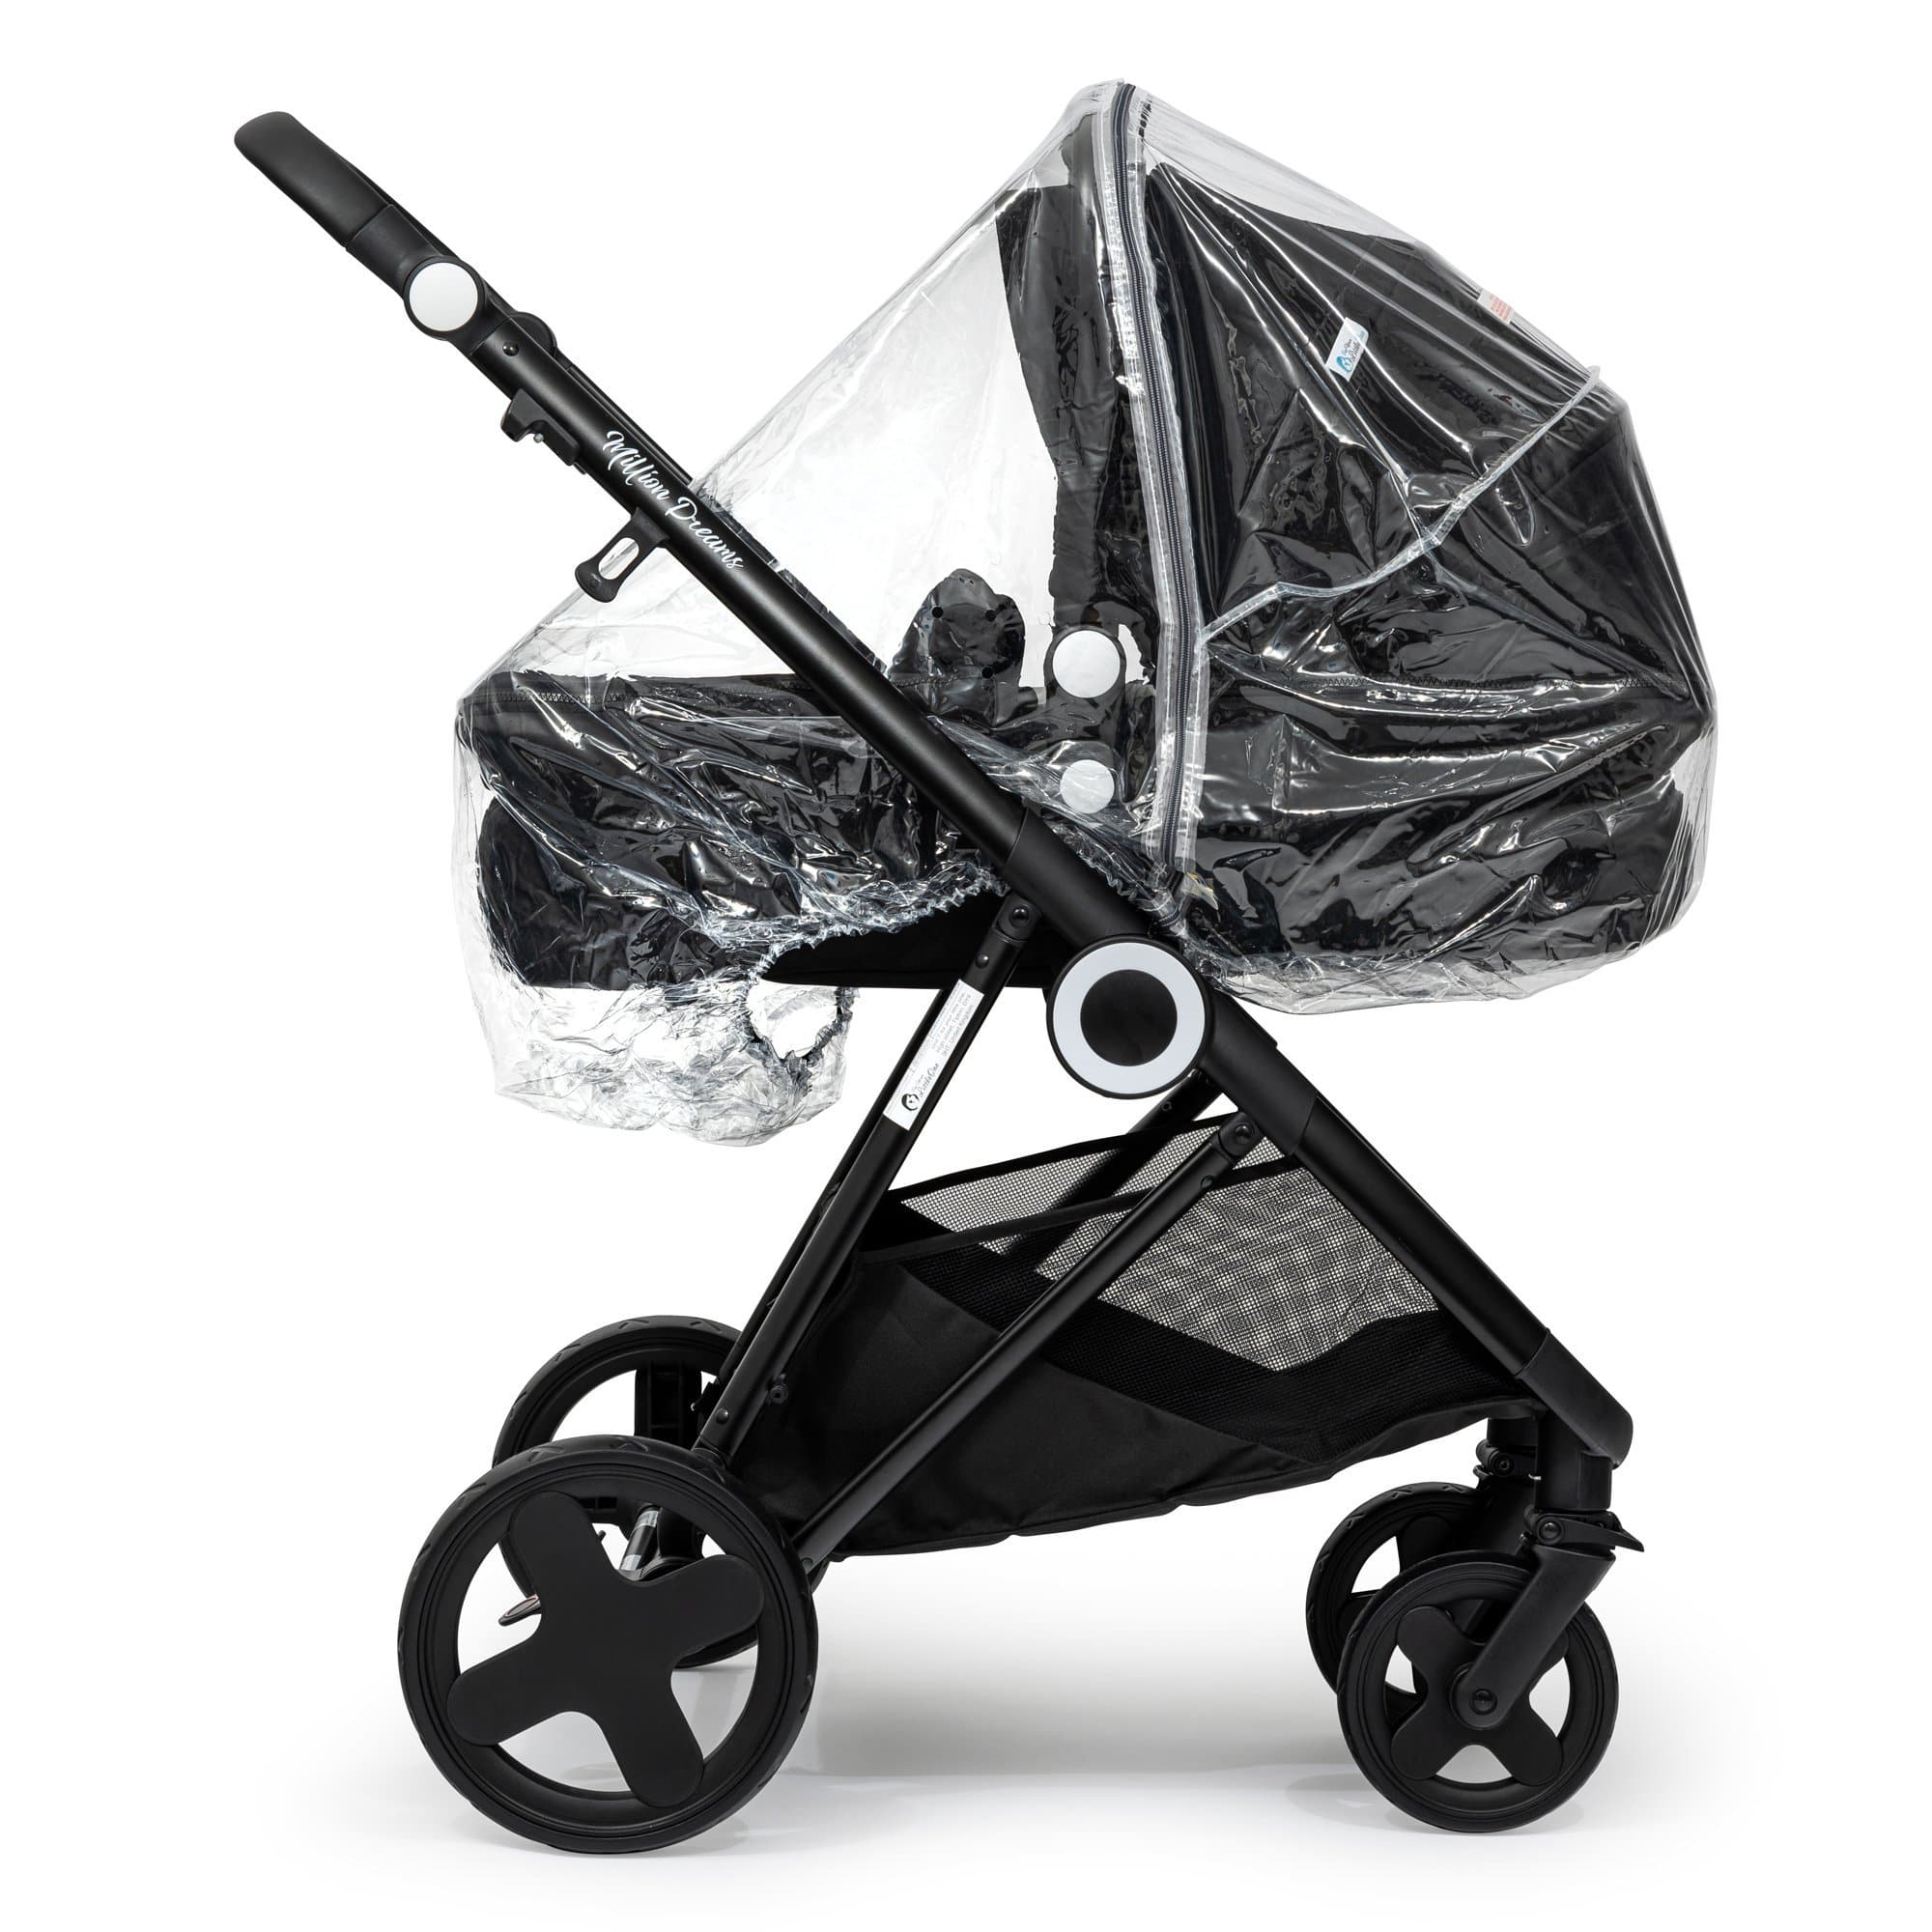 2 in 1 Rain Cover Compatible with Baby Jogger - Fits All Models - For Your Little One